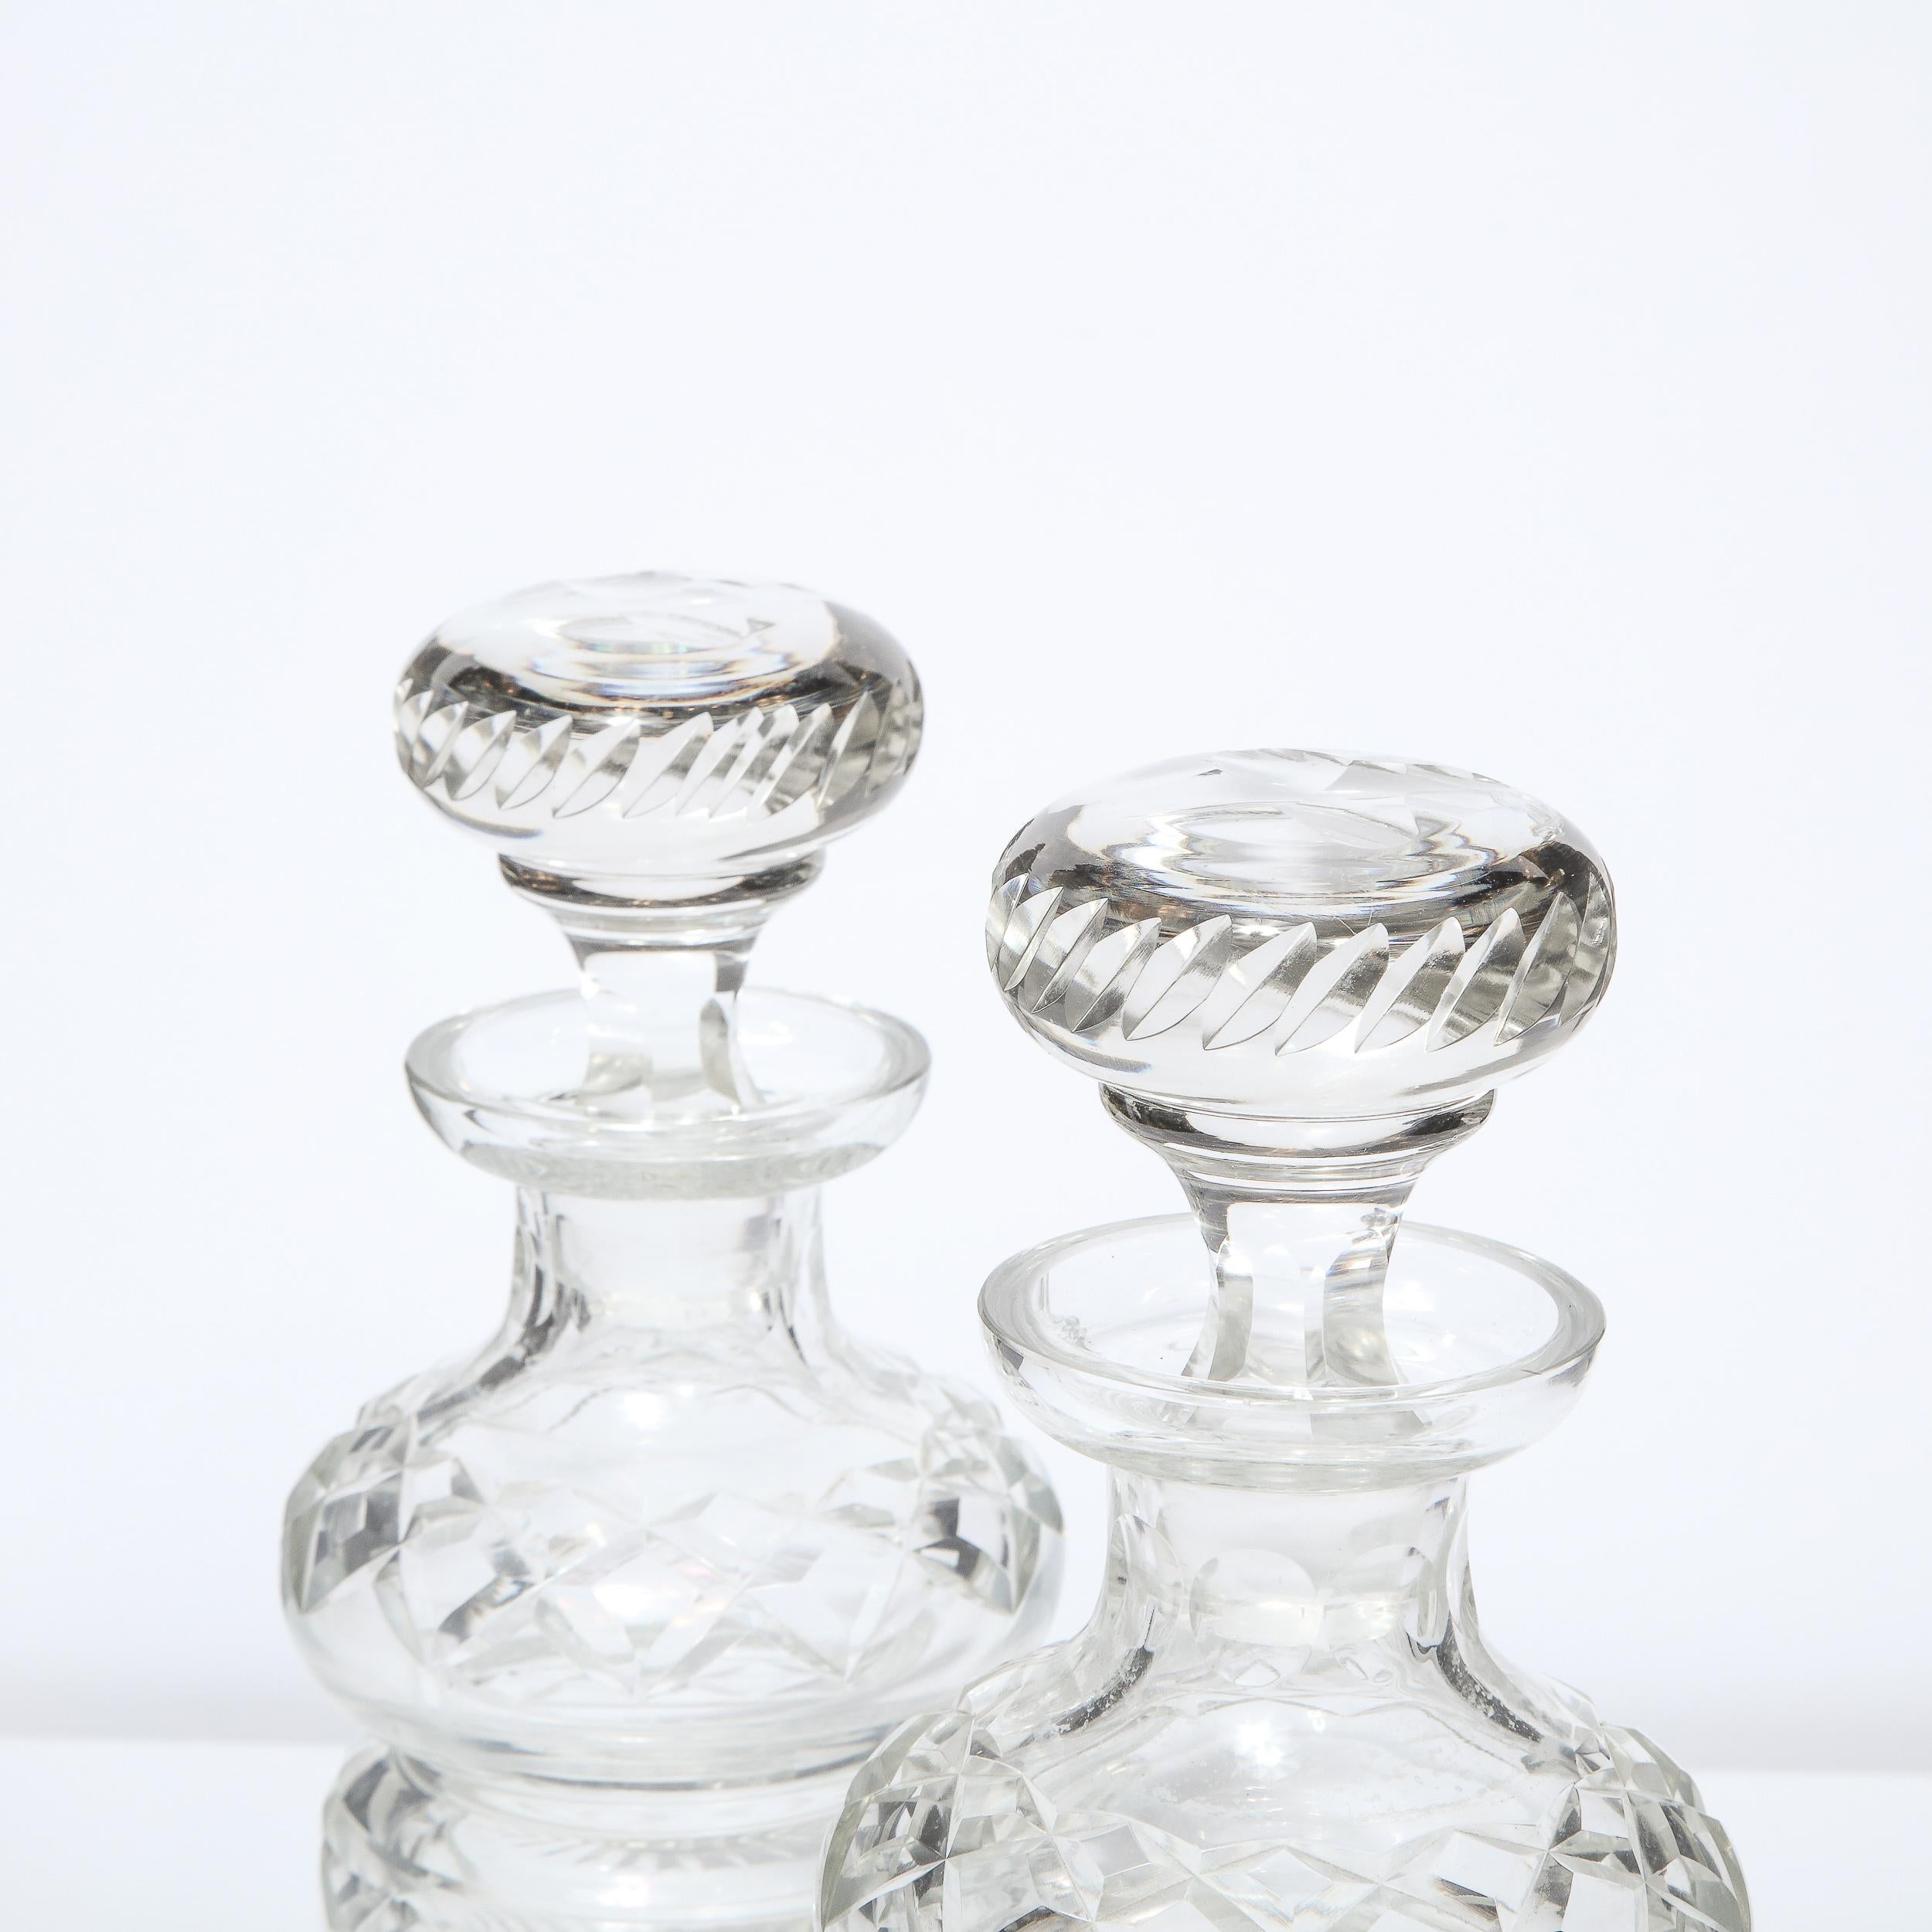 Mid-20th Century Pair of Mid-Century Modern Etched Translucent Crystal Decanters